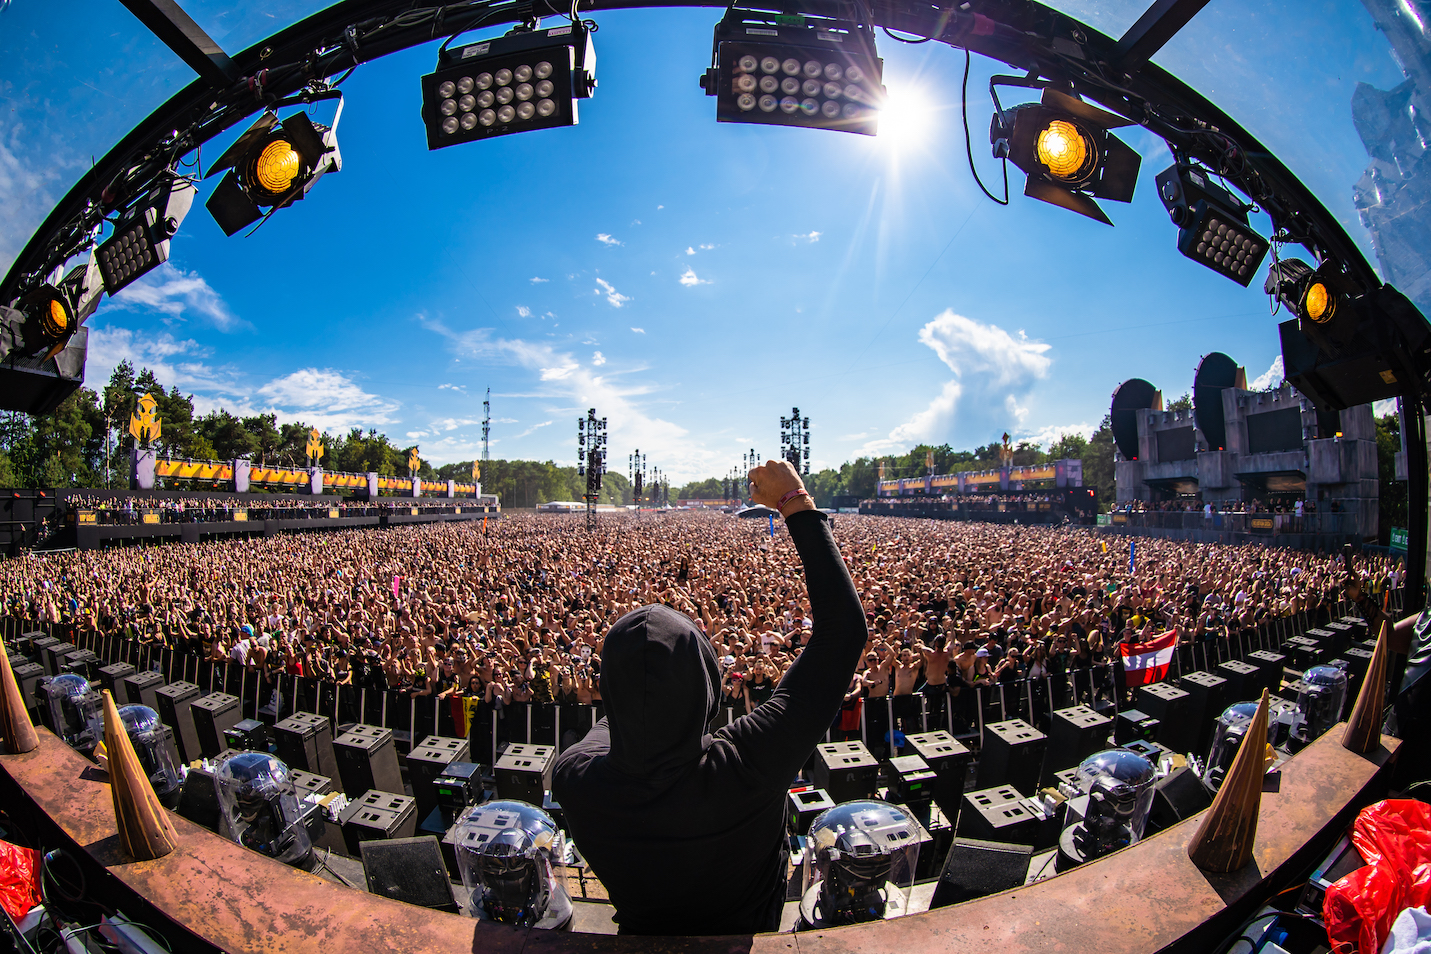 IMPORTANT UPDATE: Free Festival and Dominator postponed